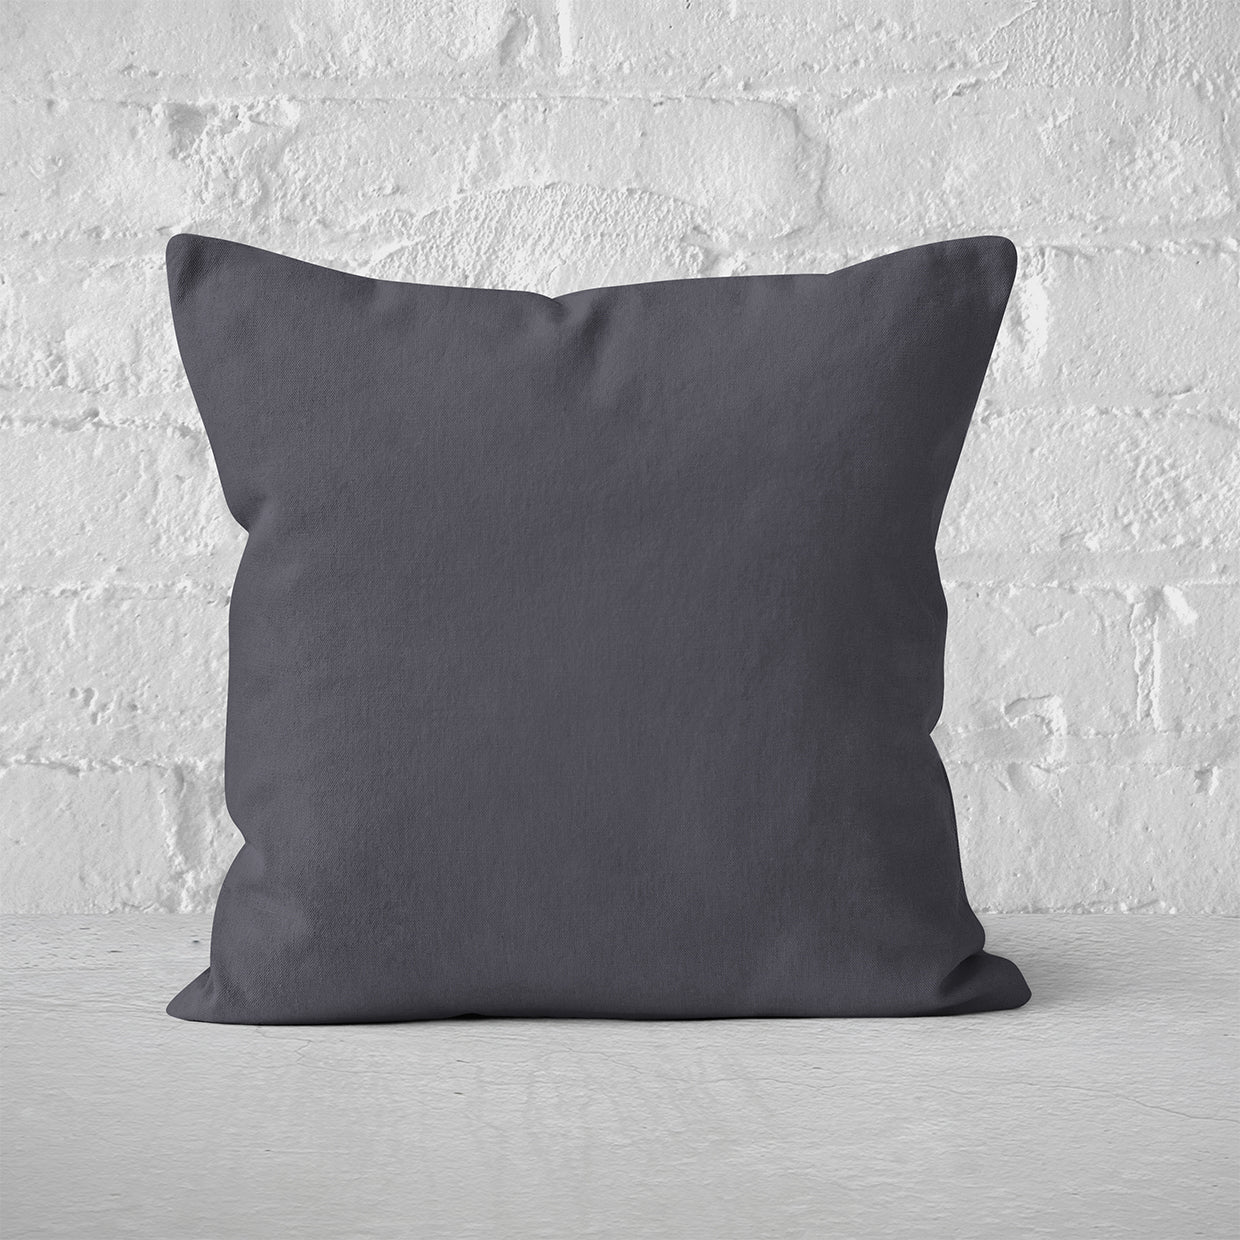 Pillow Cover Art Feature 'Solid' - Dark Grey - Cotton Twill